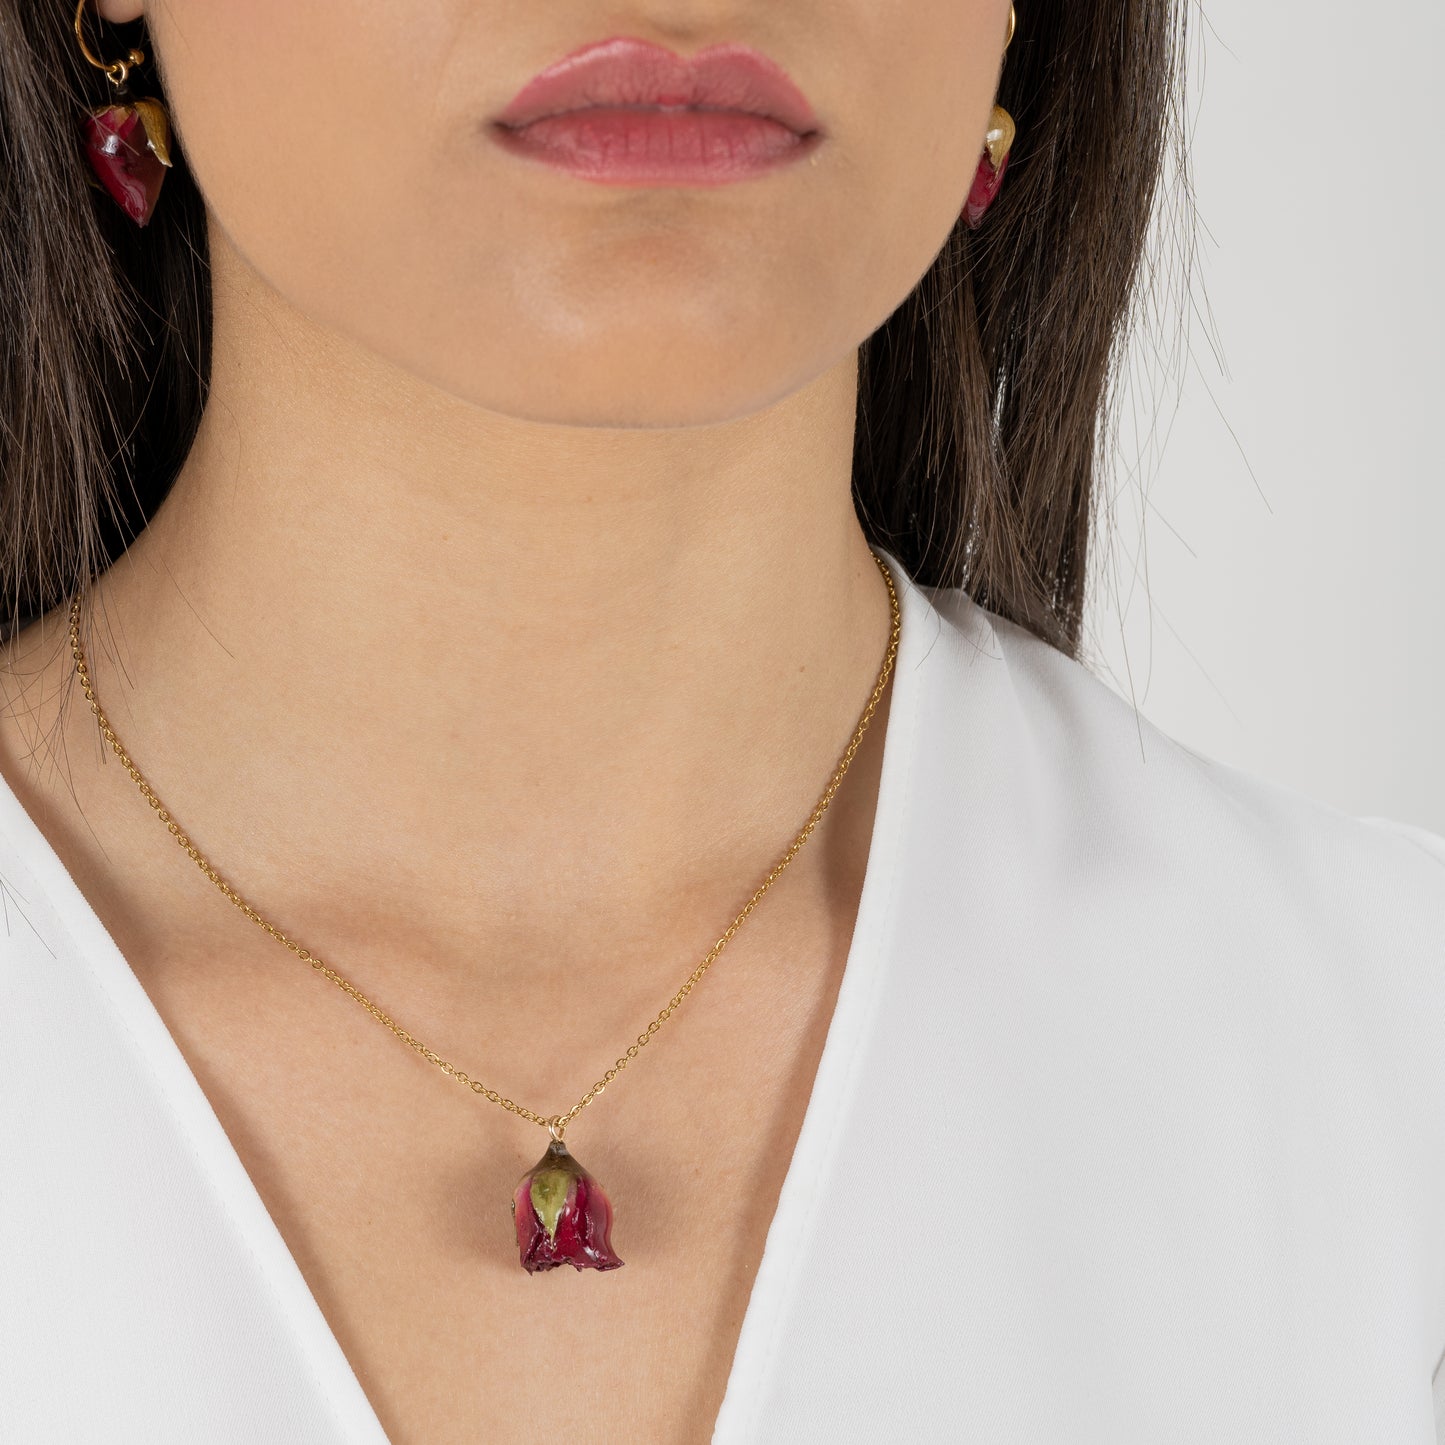 "Sempiterna" Necklace with real rose bud